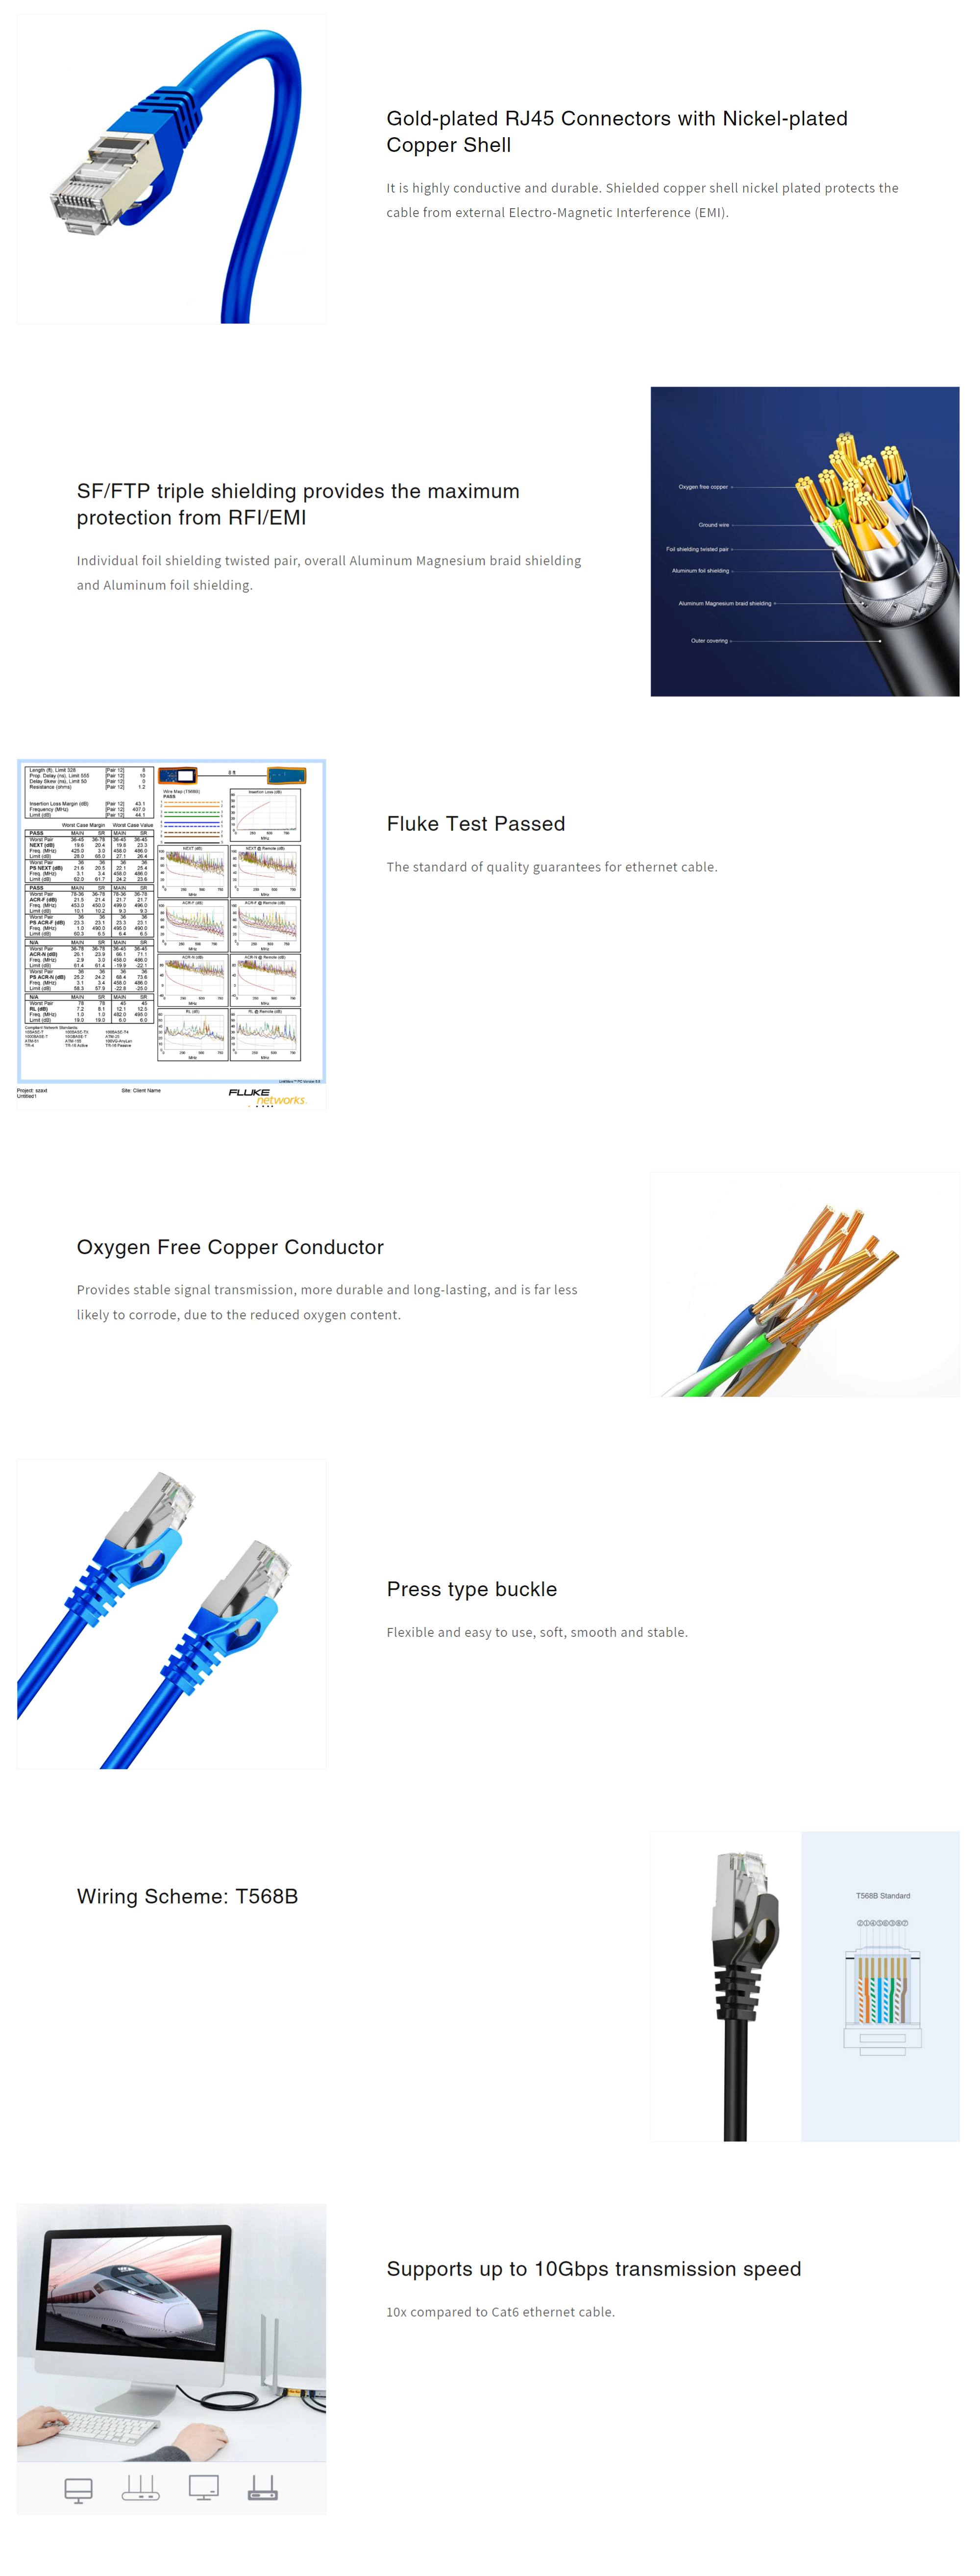 A large marketing image providing additional information about the product Cruxtec Cat7 0.3m 10GbE SF/FTP Triple Shielding Network Cable Blue - Additional alt info not provided